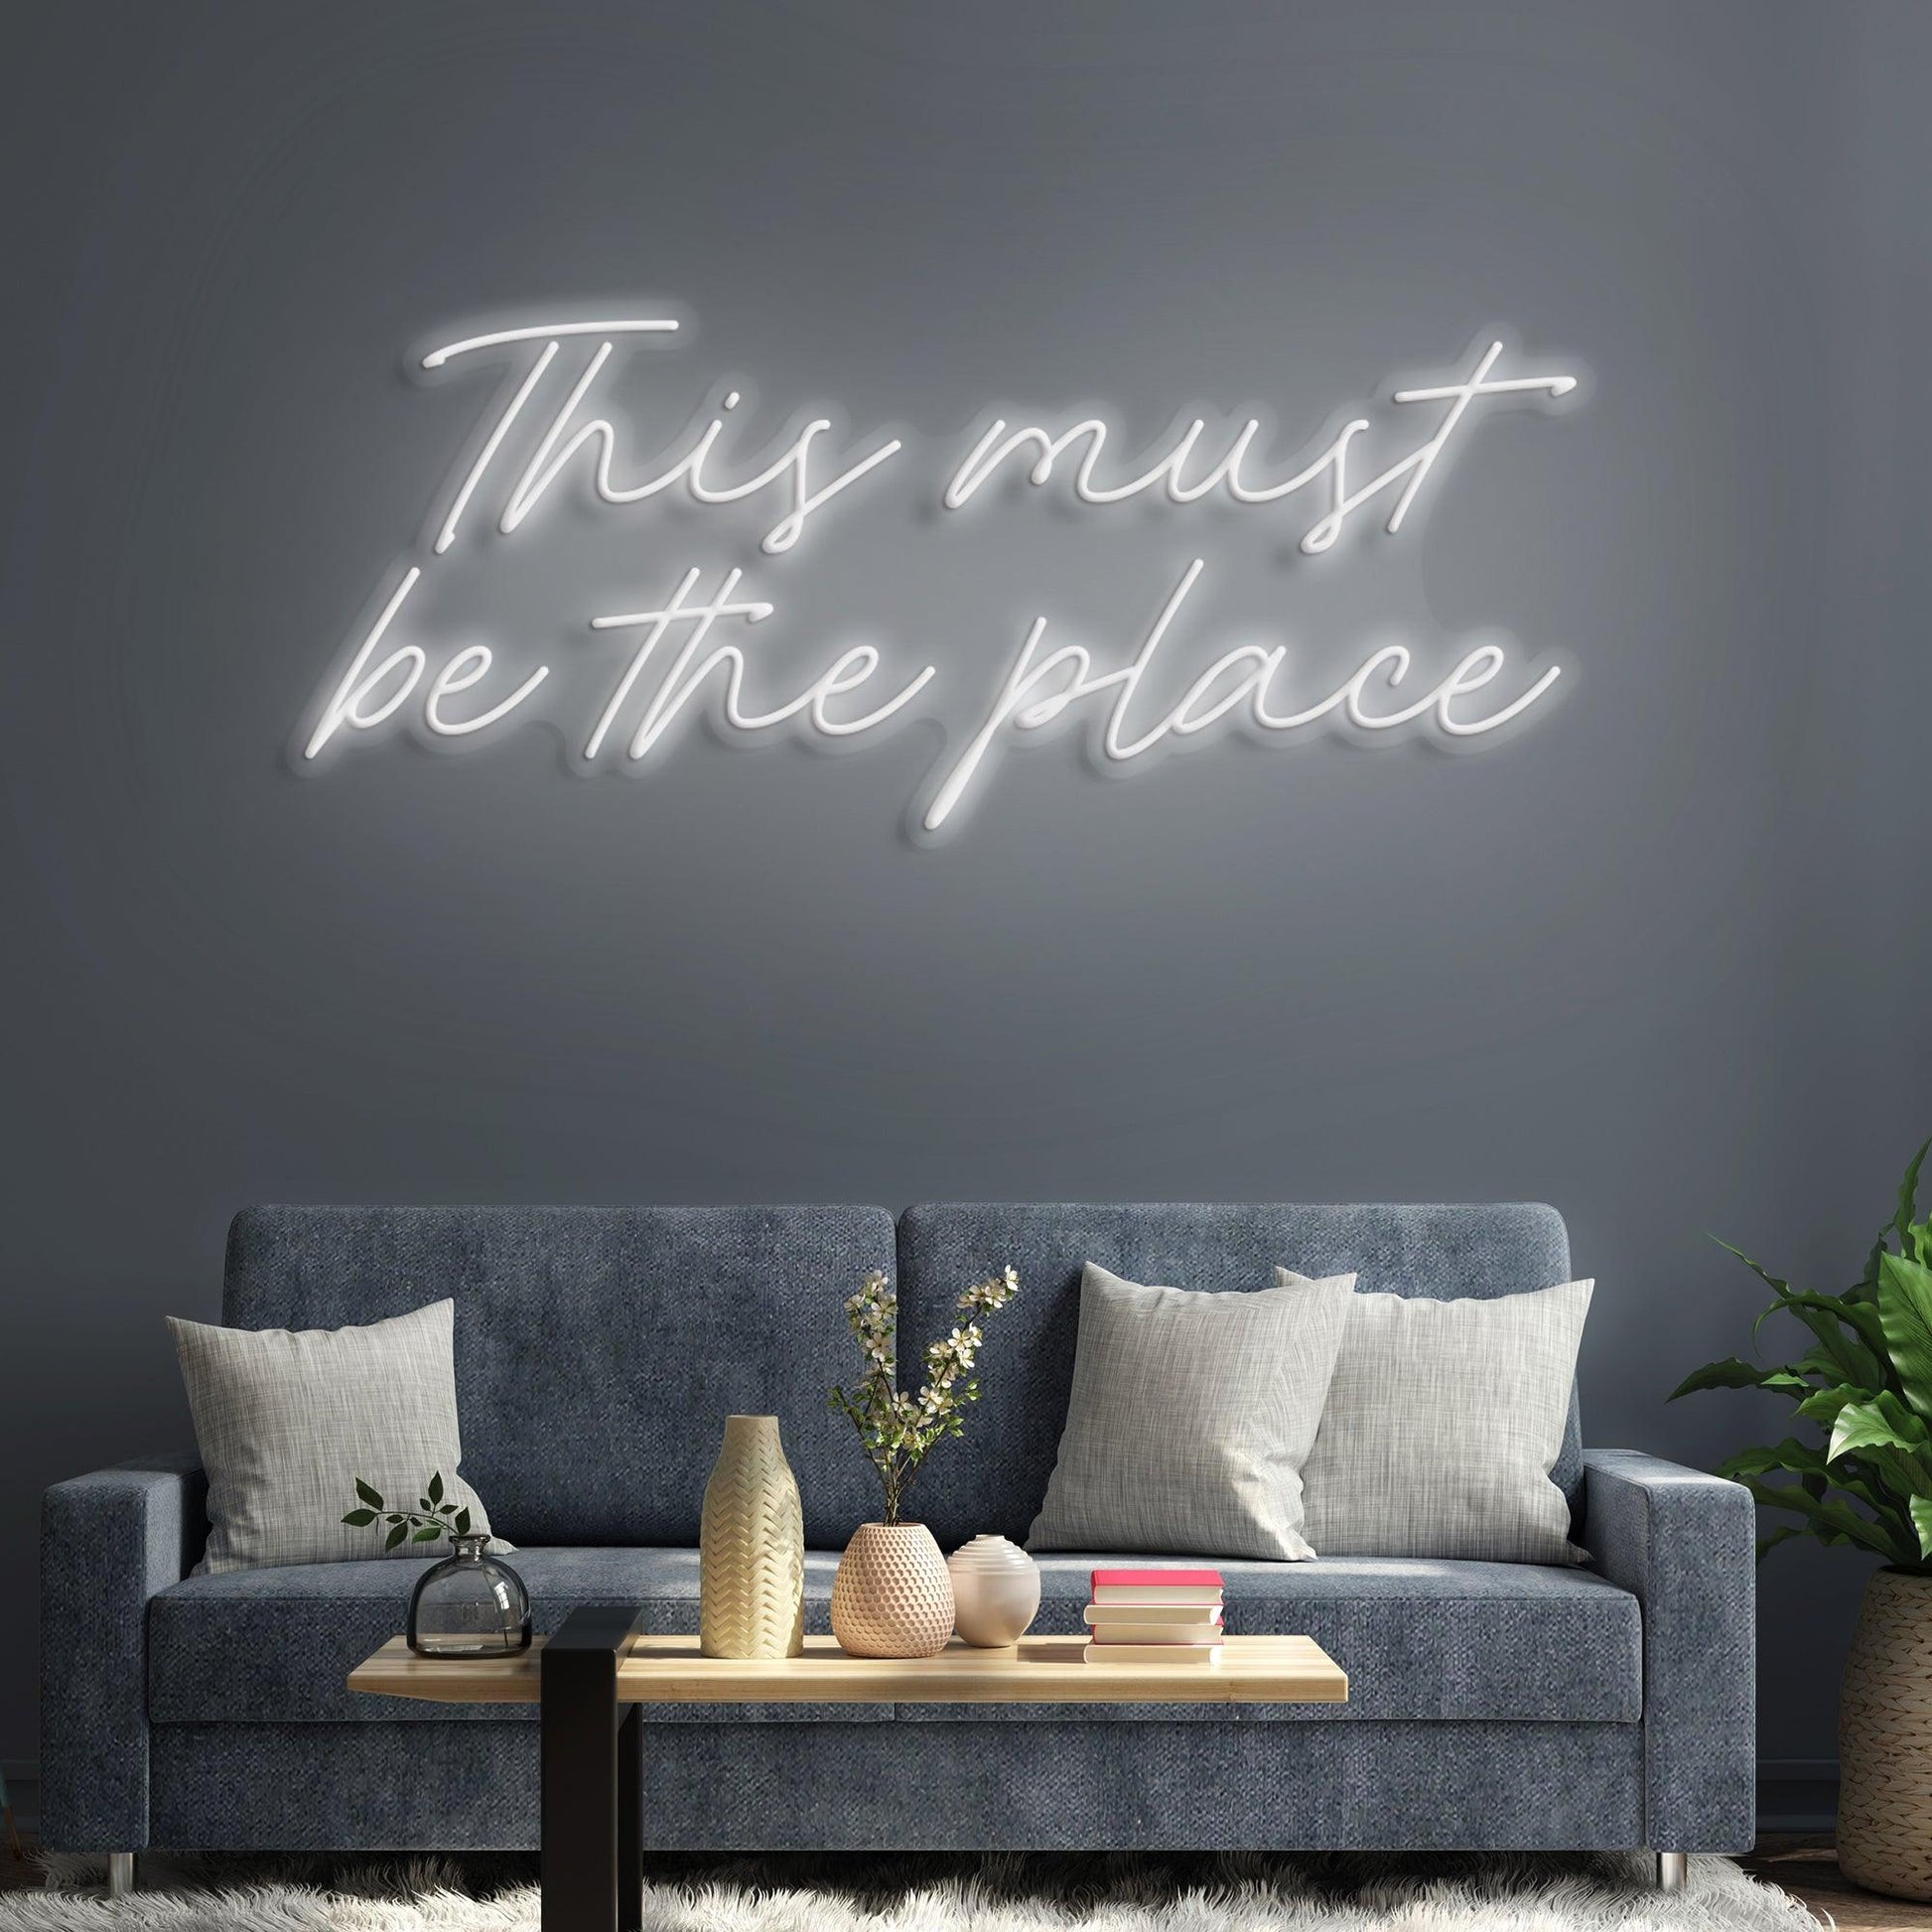 This Must Be The Place Neon Sign - Neonzastudio